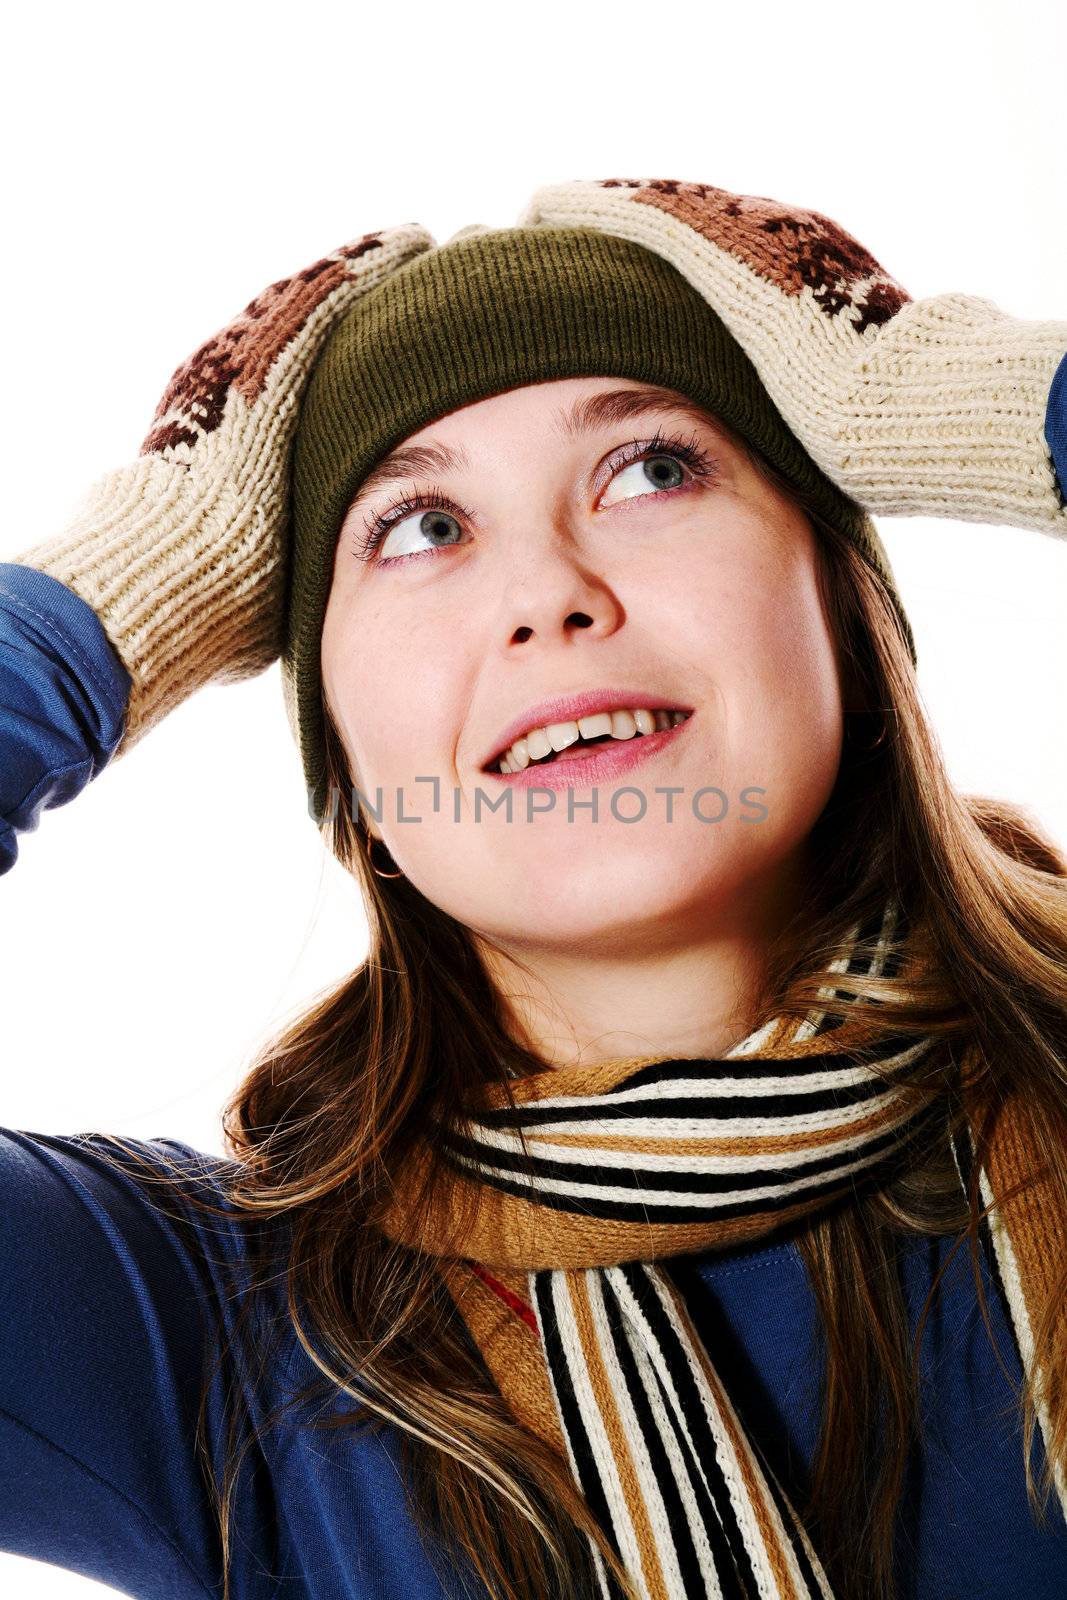 An image of a smiling girl in mittens